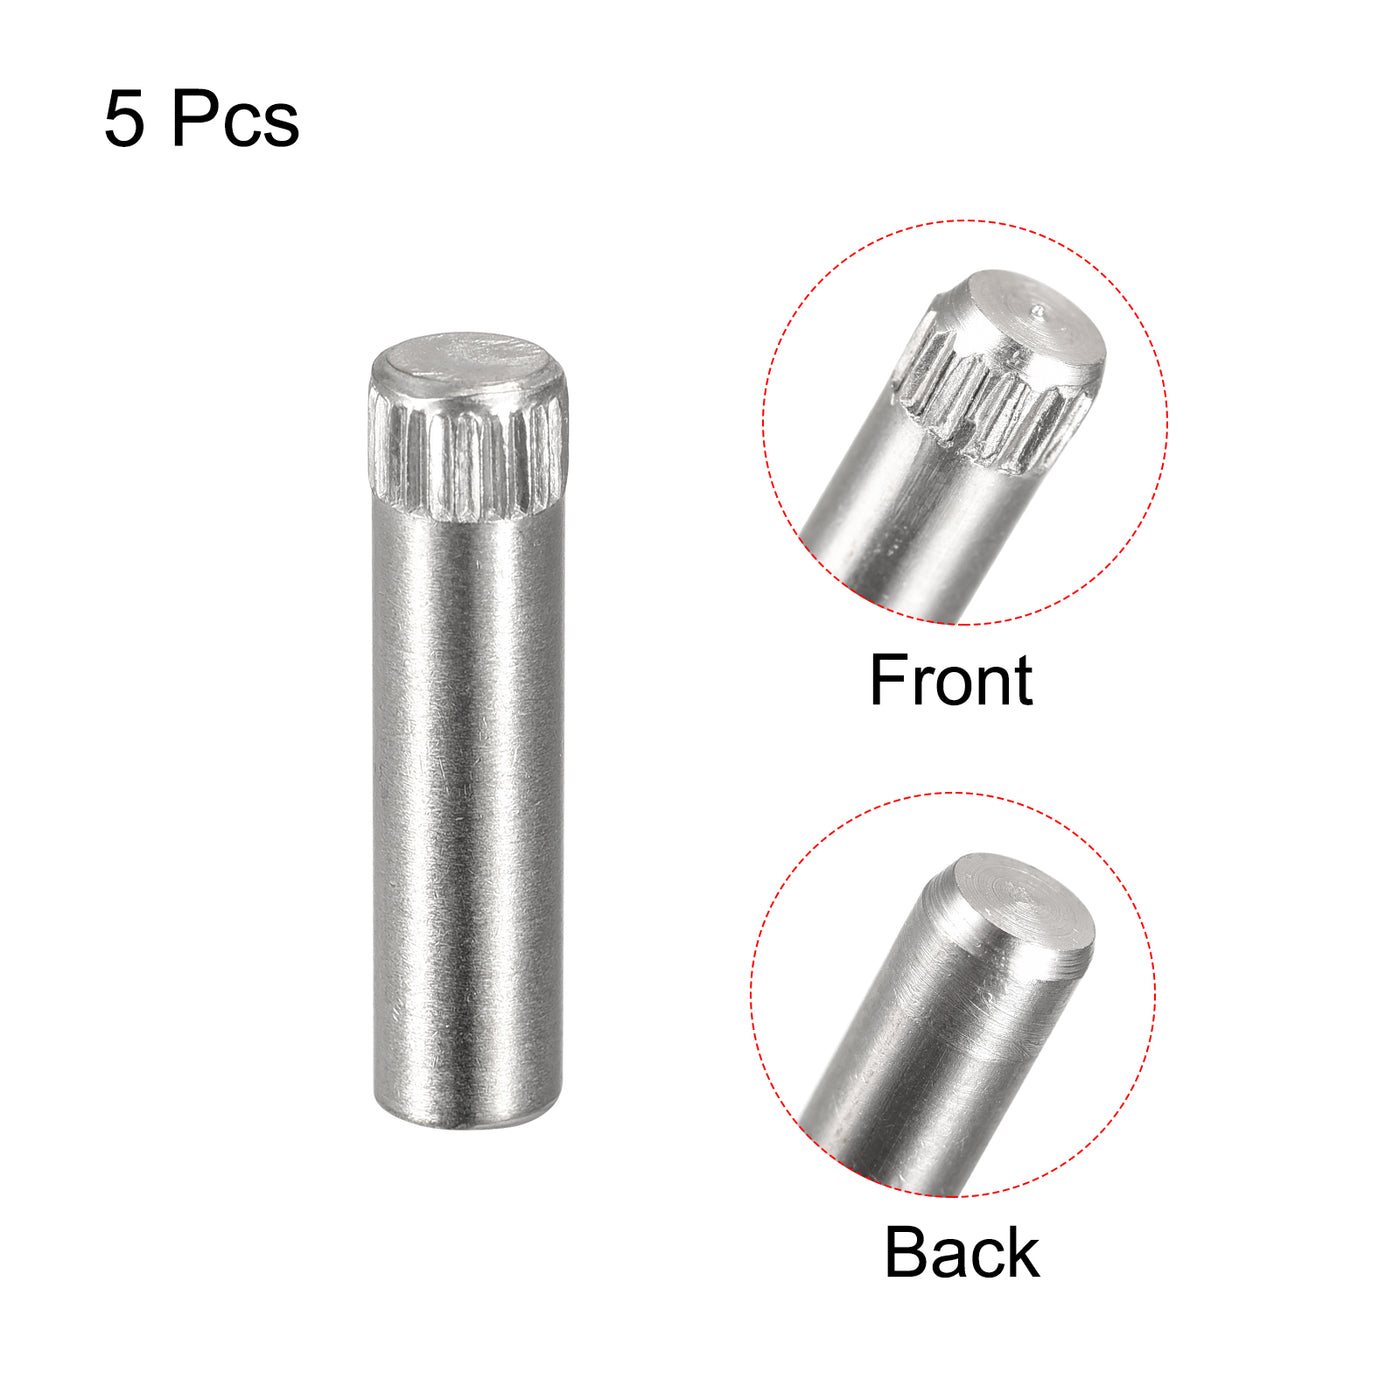 uxcell Uxcell 6x25mm 304 Stainless Steel Dowel Pins, 5Pcs Knurled Head Flat End Dowel Pin